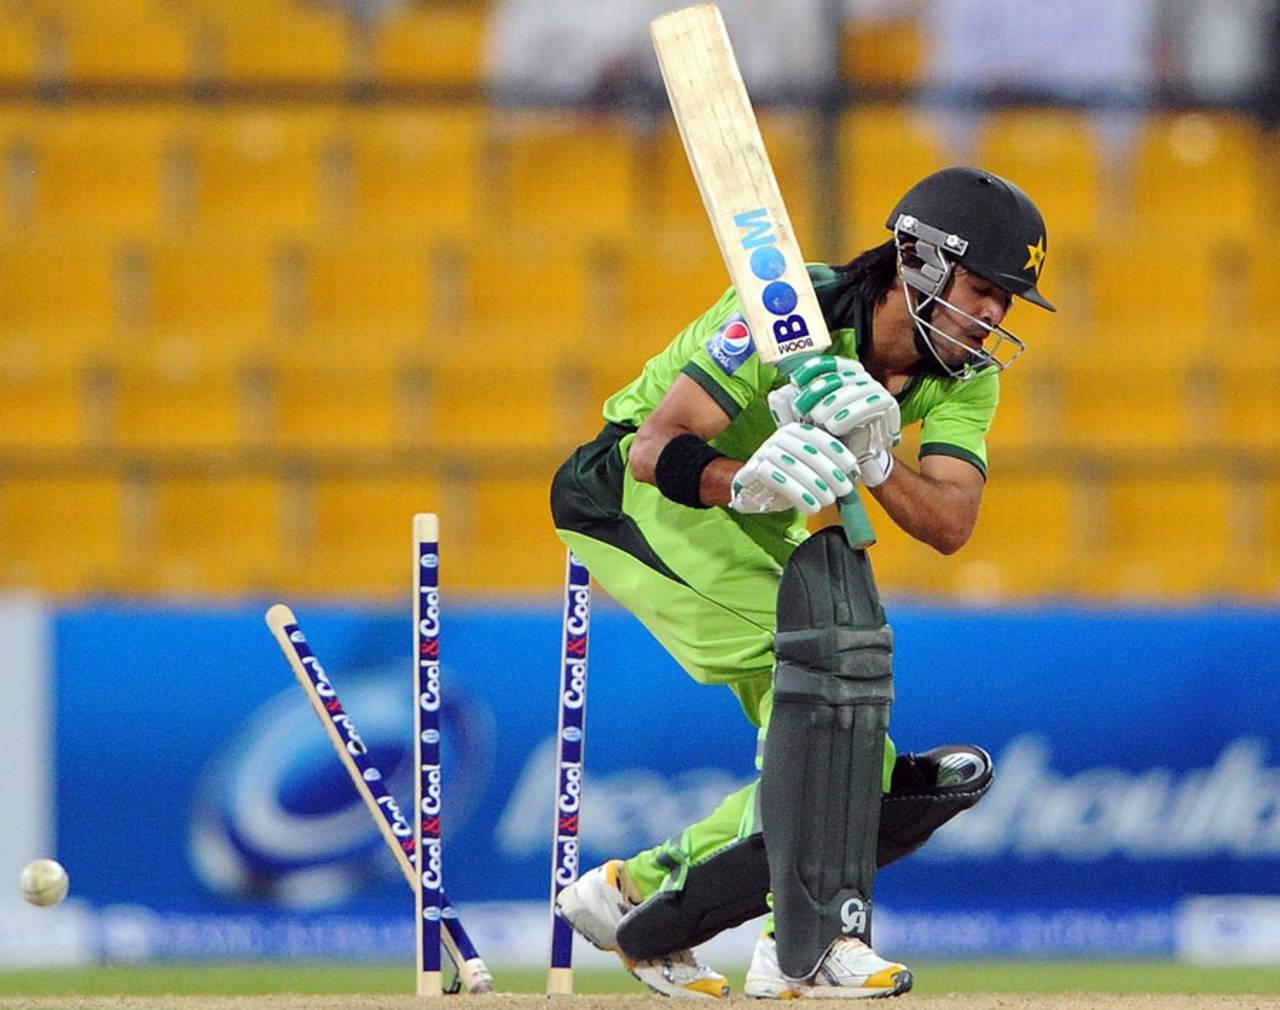 Fawad Alam has his stumps rearranged by Charl Langeveldt, Pakistan v South Africa, 1st ODI, Abu Dhabi, October 29, 2010